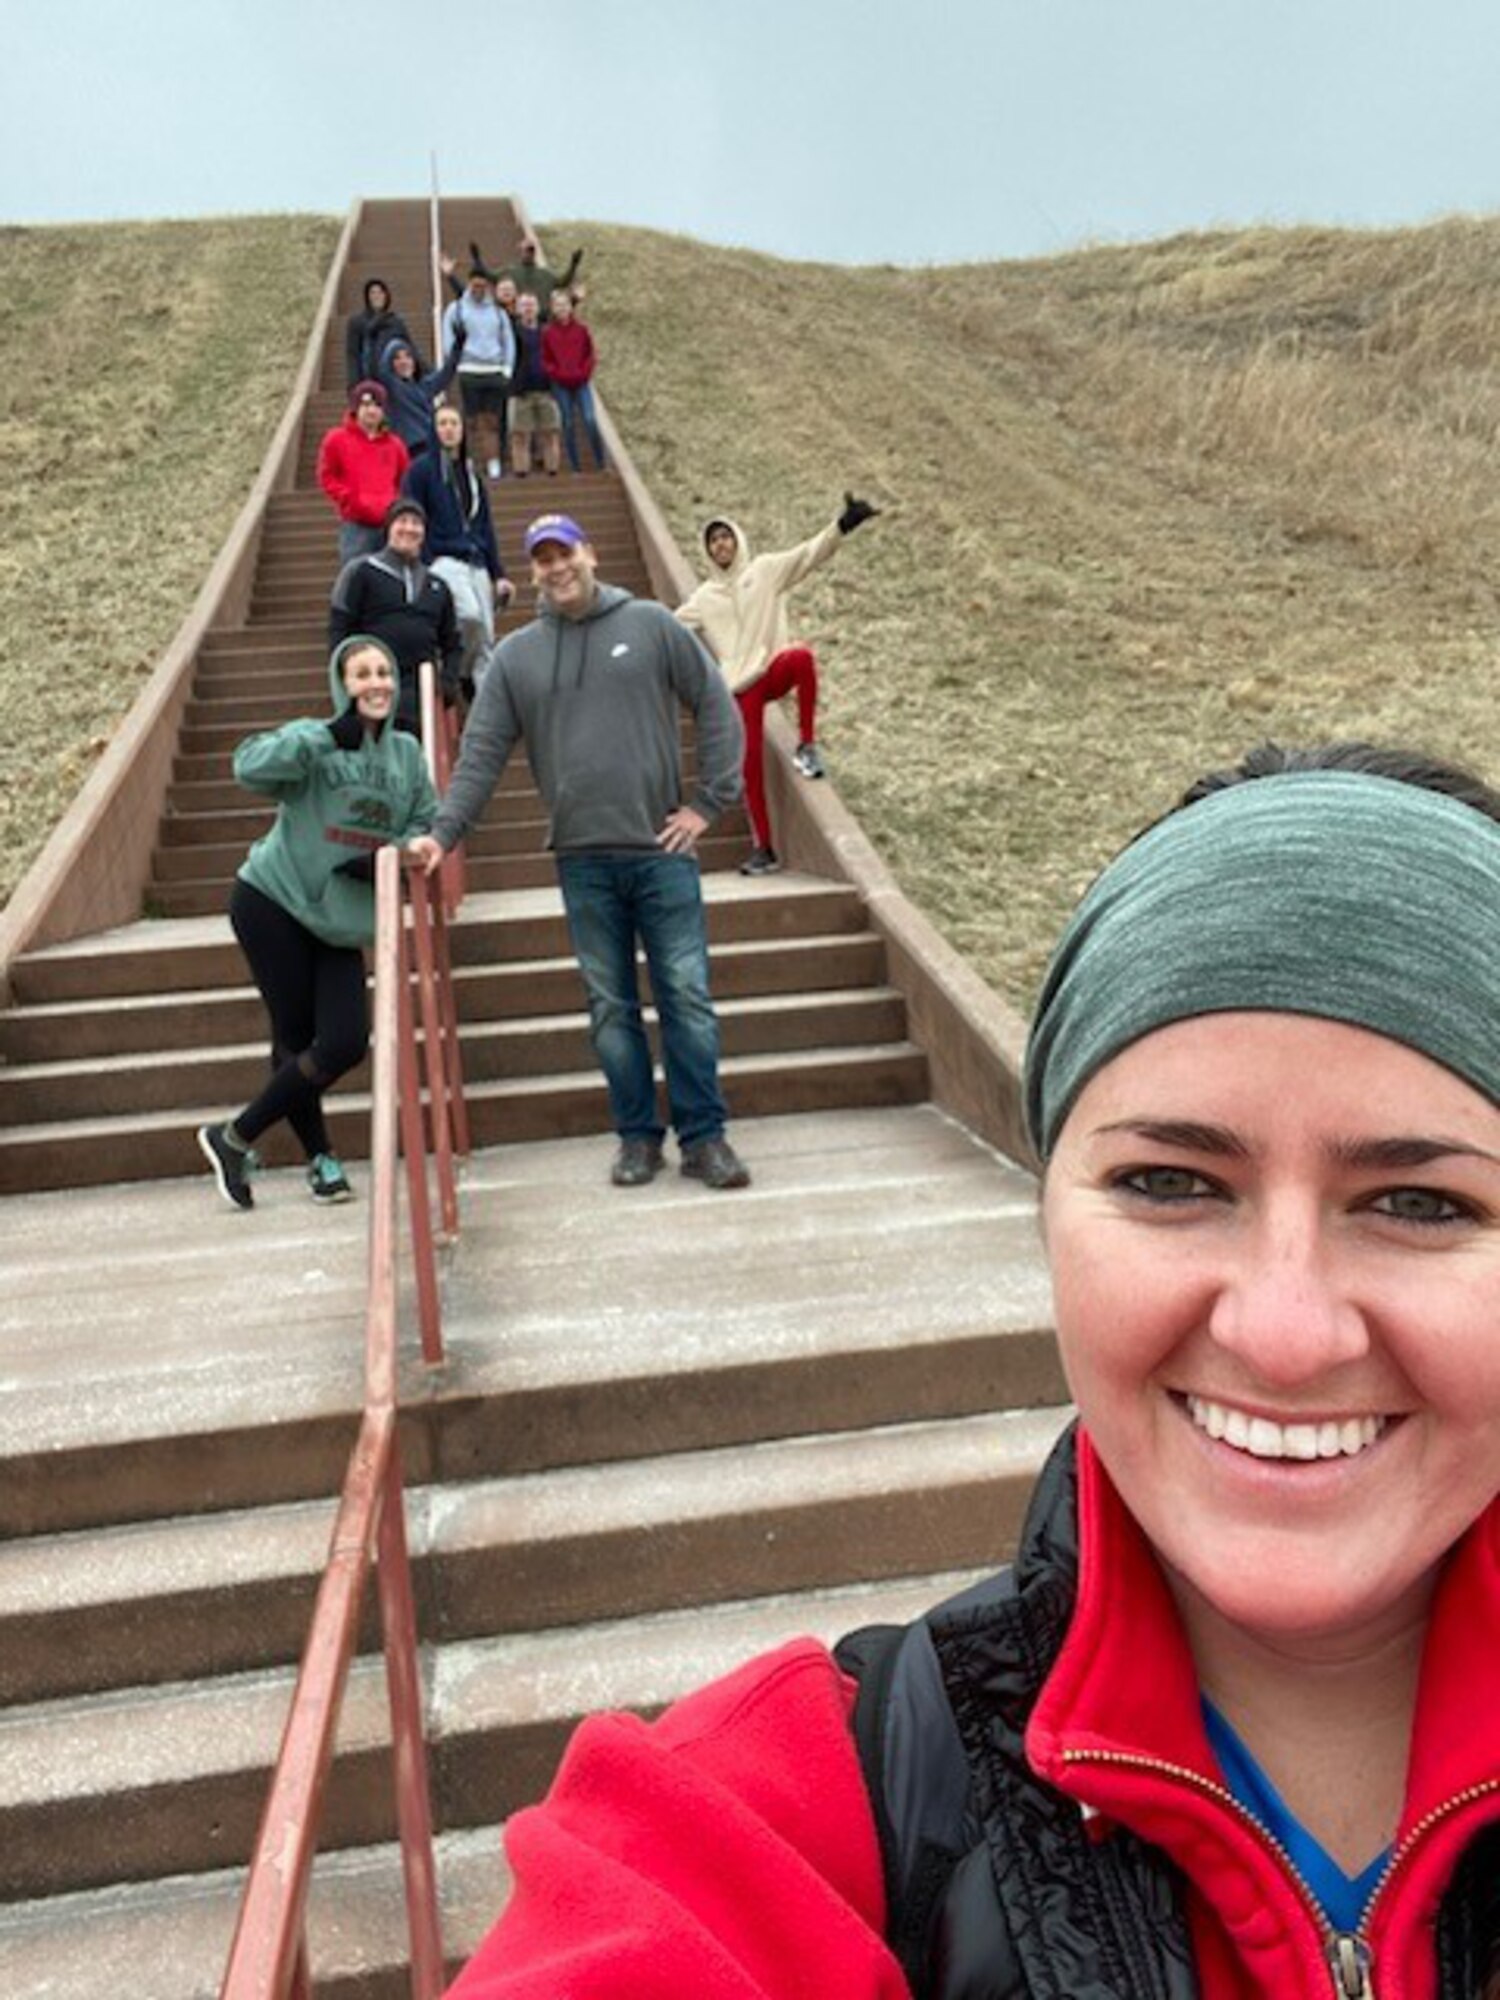 Woman taking selfie with people posing on stairs in background.